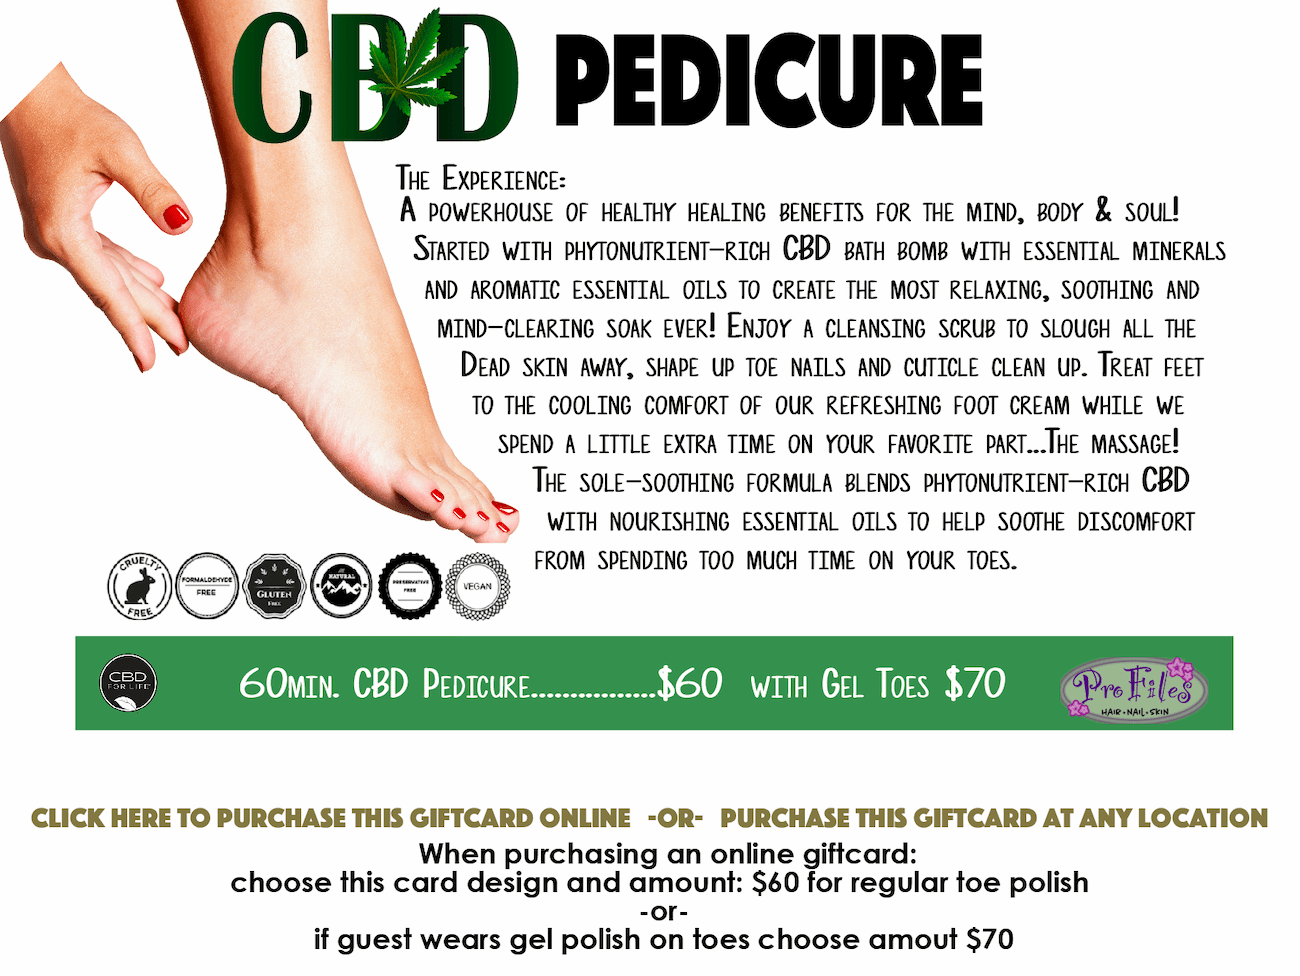 60 min CBD pedicure for $60. Click to purchase gift card.